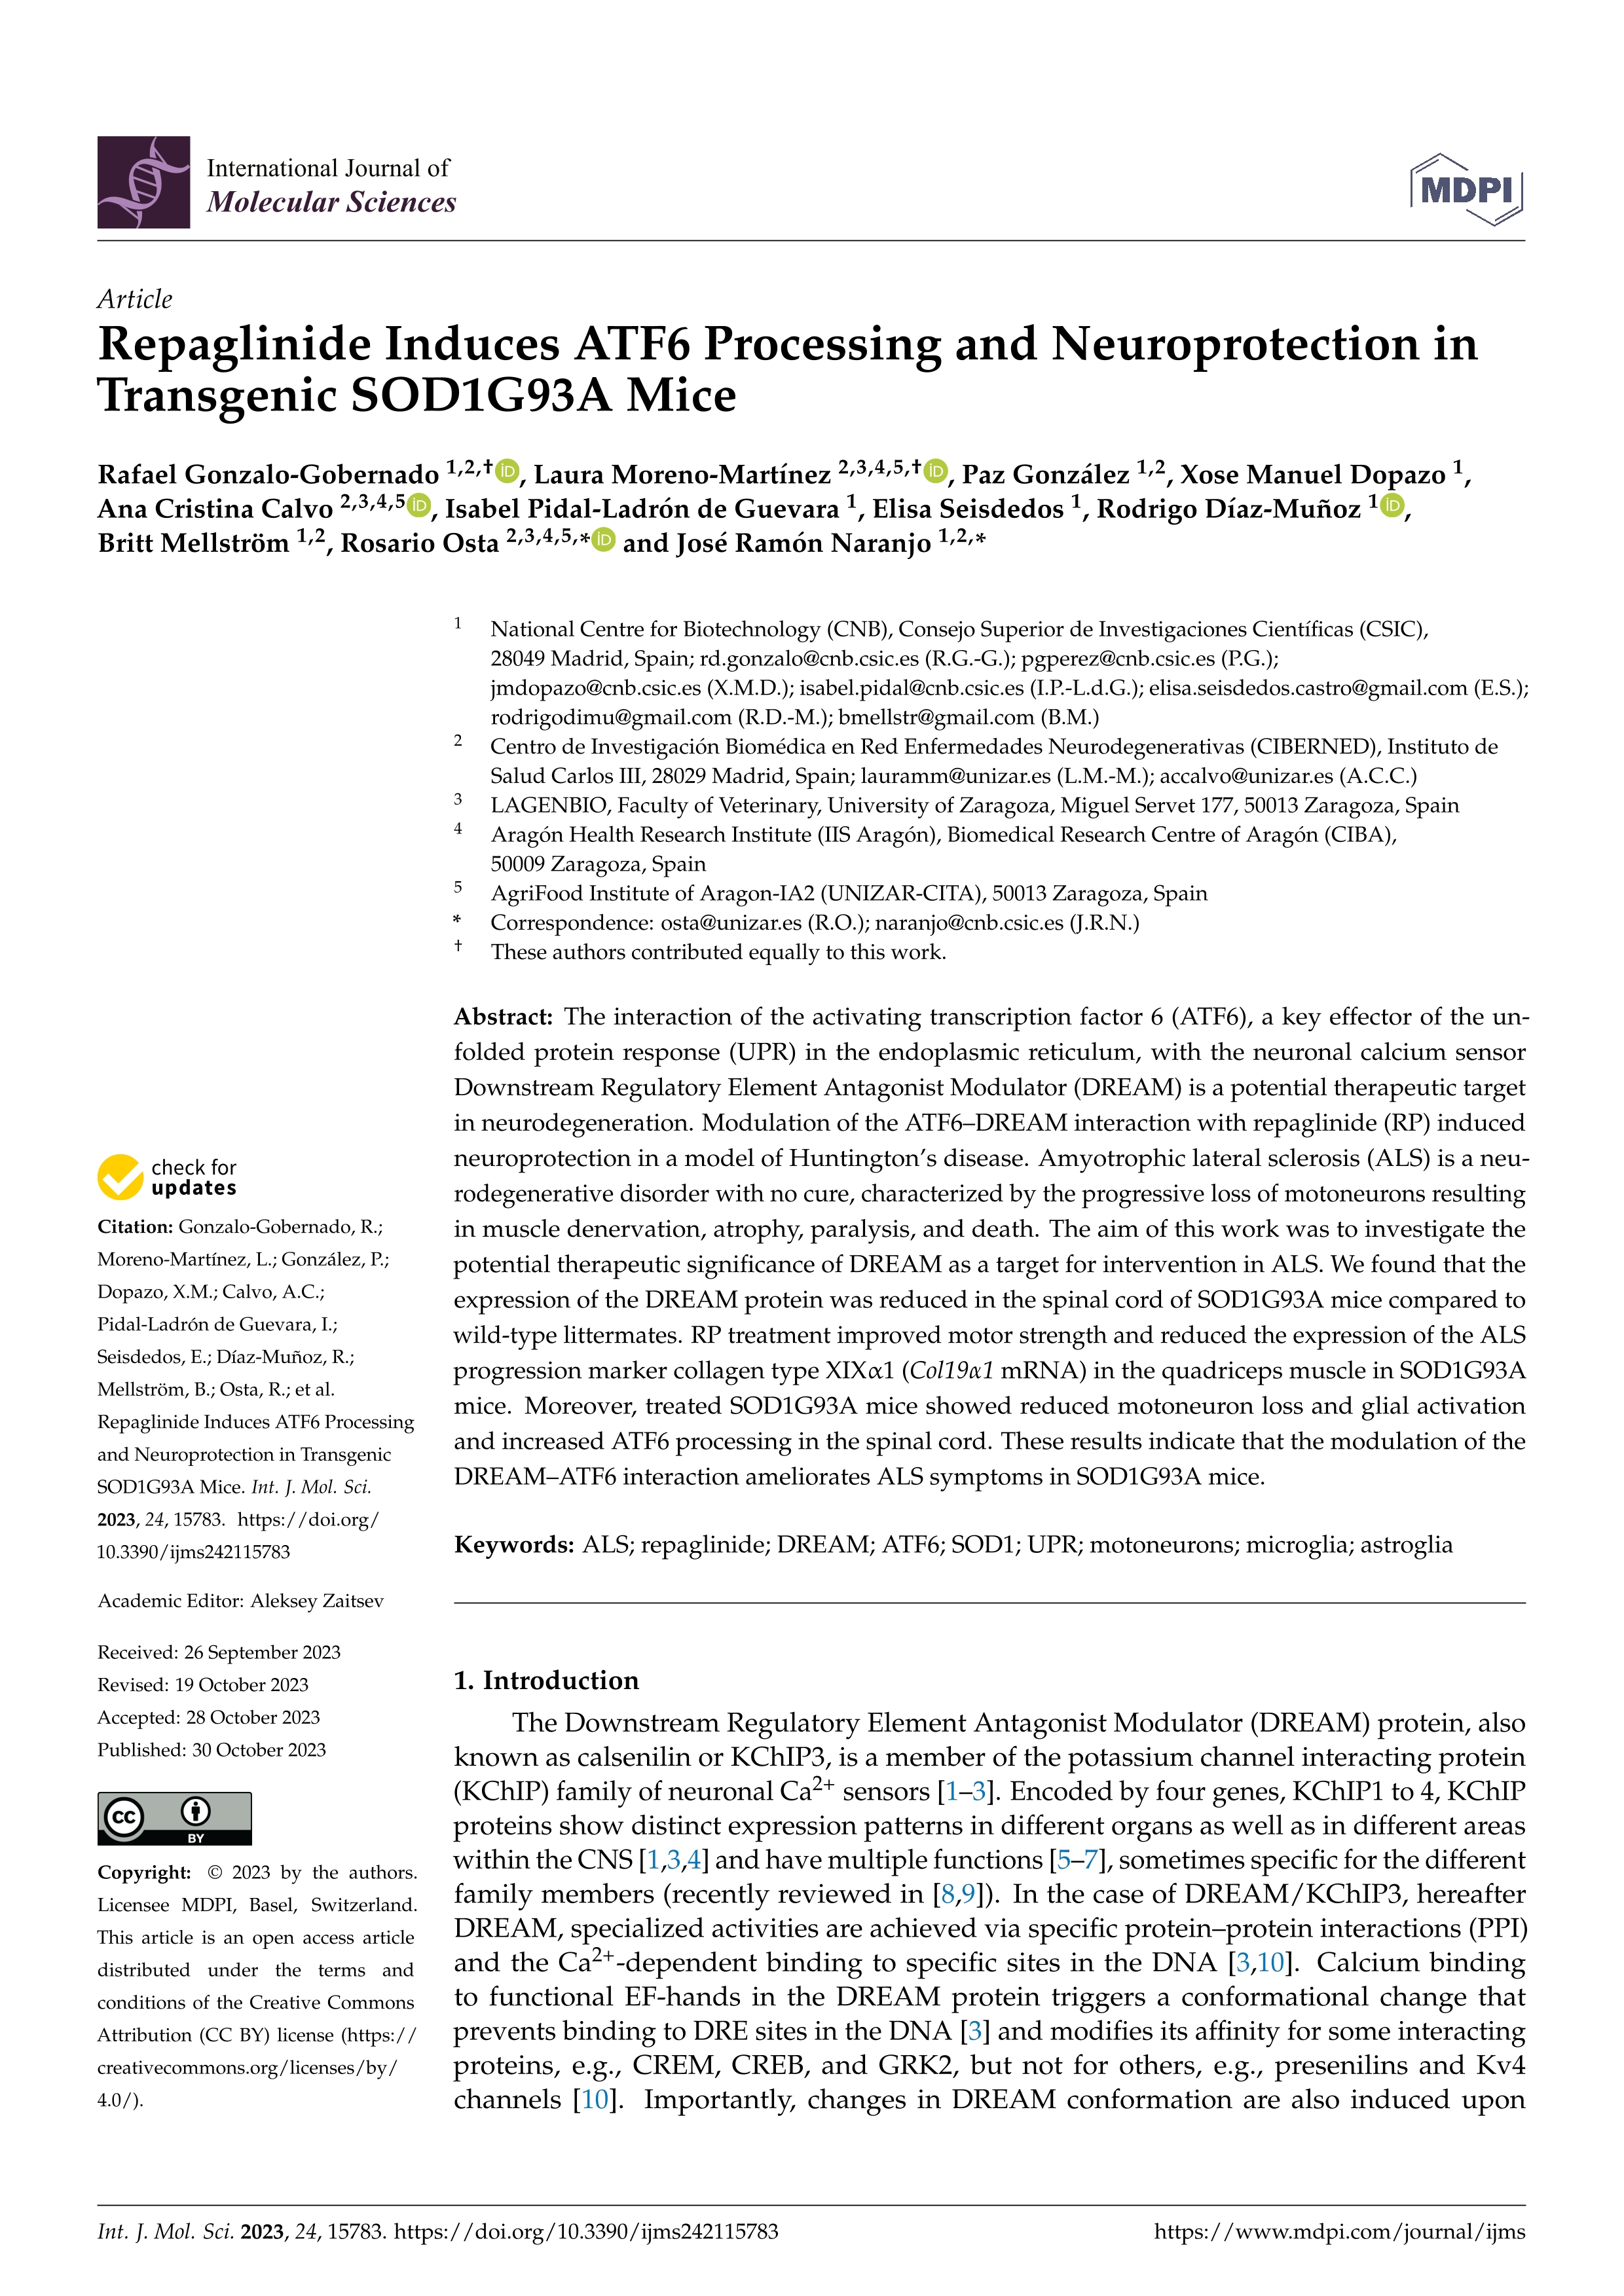 Repaglinide induces 003726 processing and neuroprotection in transgenic SOD1G93A mice